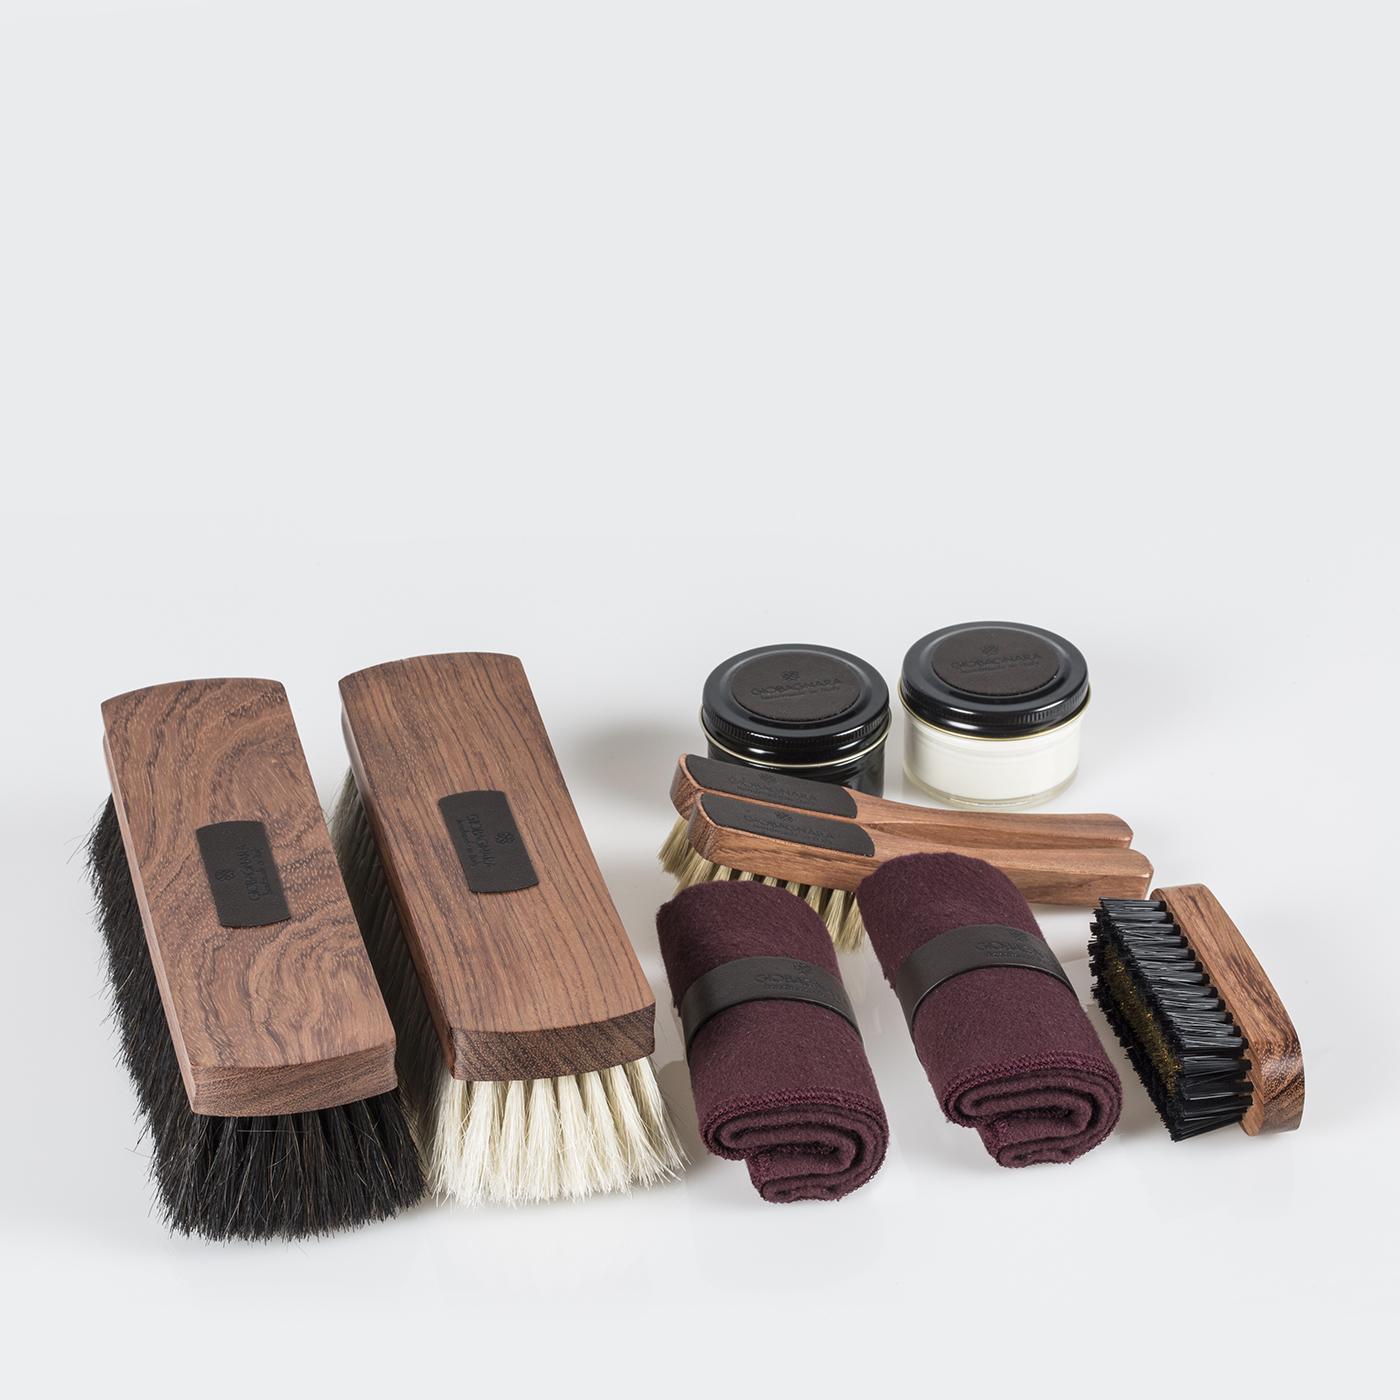 This exquisite shoe care set is a functional piece that, thanks to its expert artisanal crafting, its impeccable design, and the fine materials used, is also an object of decor that will add a precious touch to everyday life. The wooden box and its